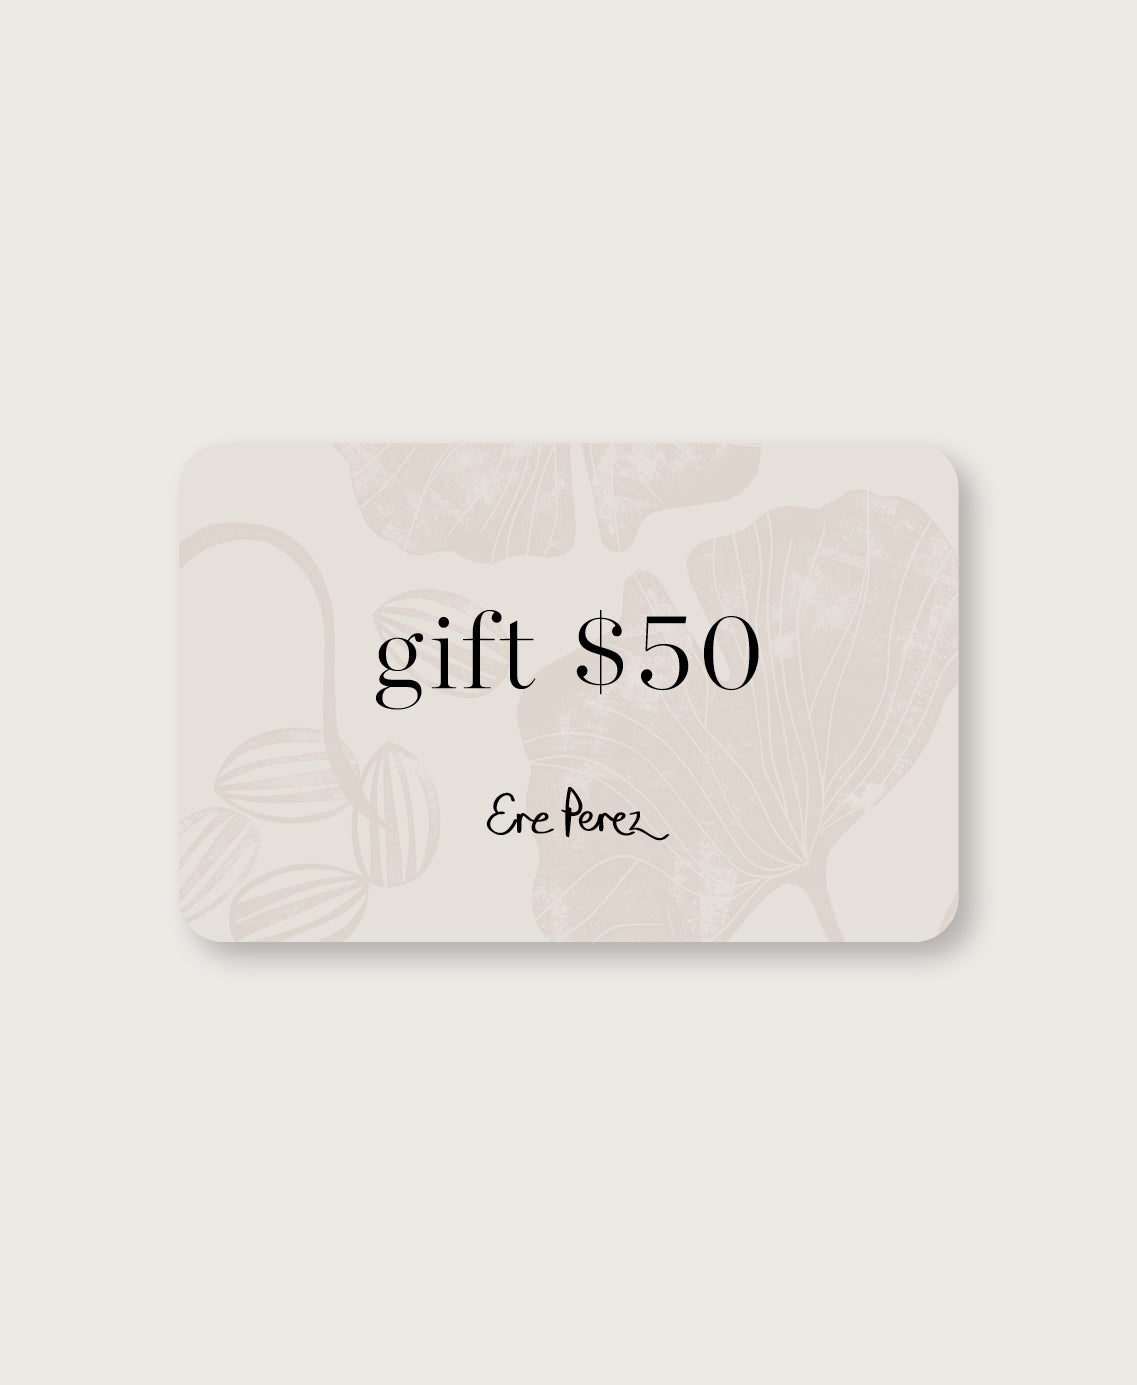 gift card $50 AUD